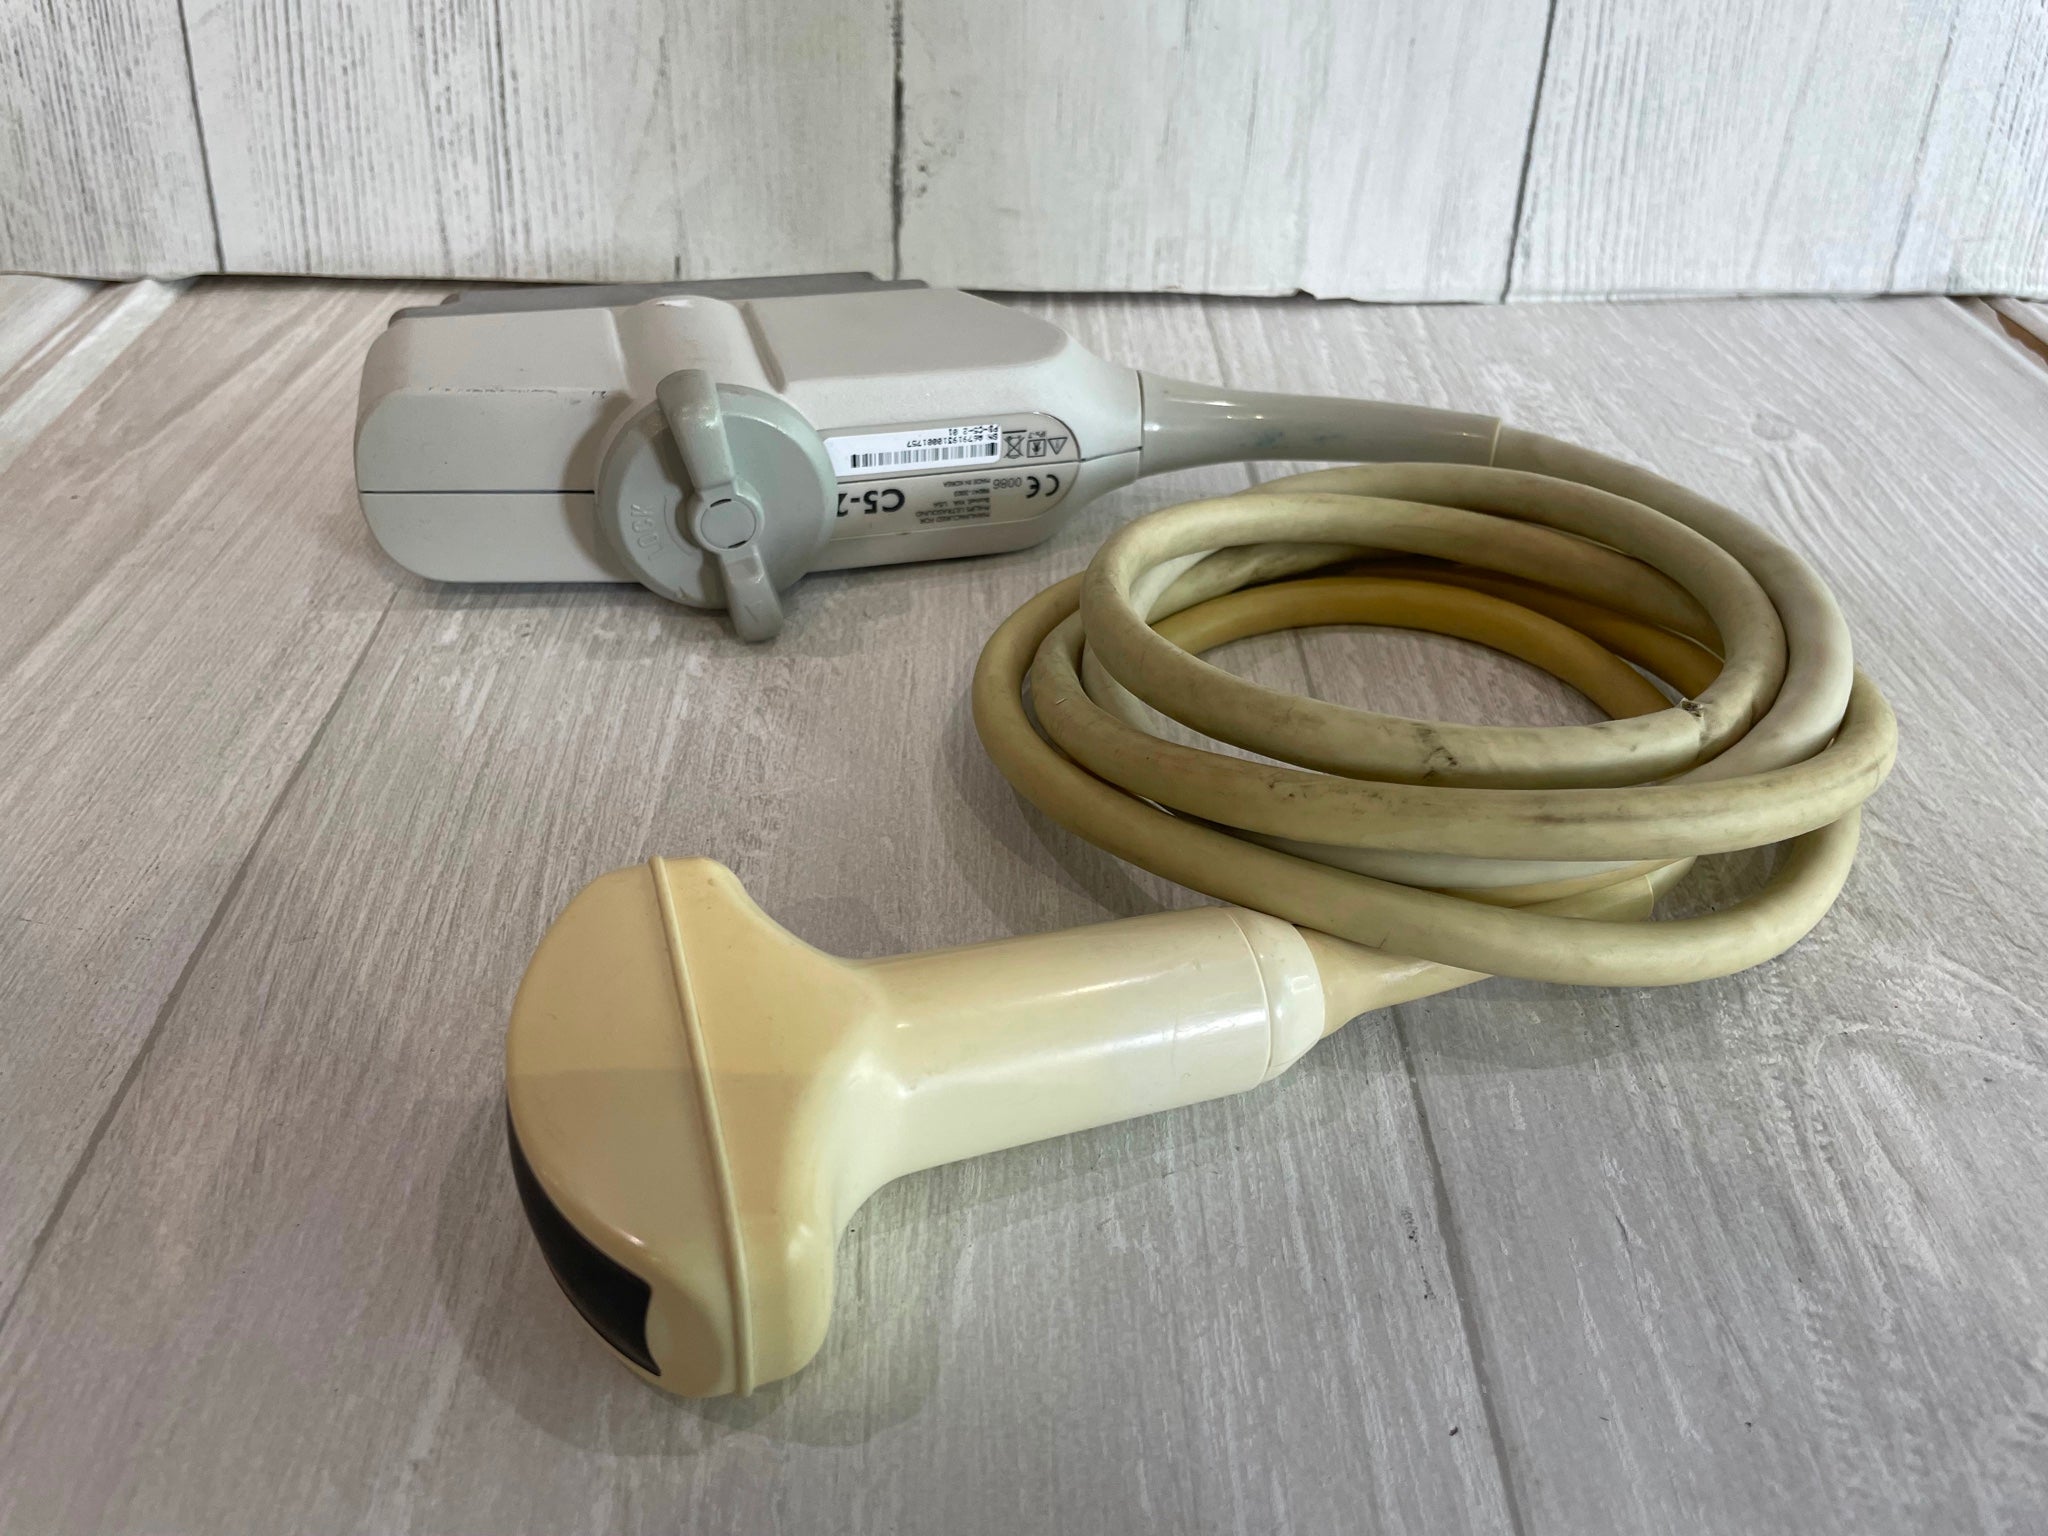 Philips C5-2 Ultrasound Probe Transducer DIAGNOSTIC ULTRASOUND MACHINES FOR SALE